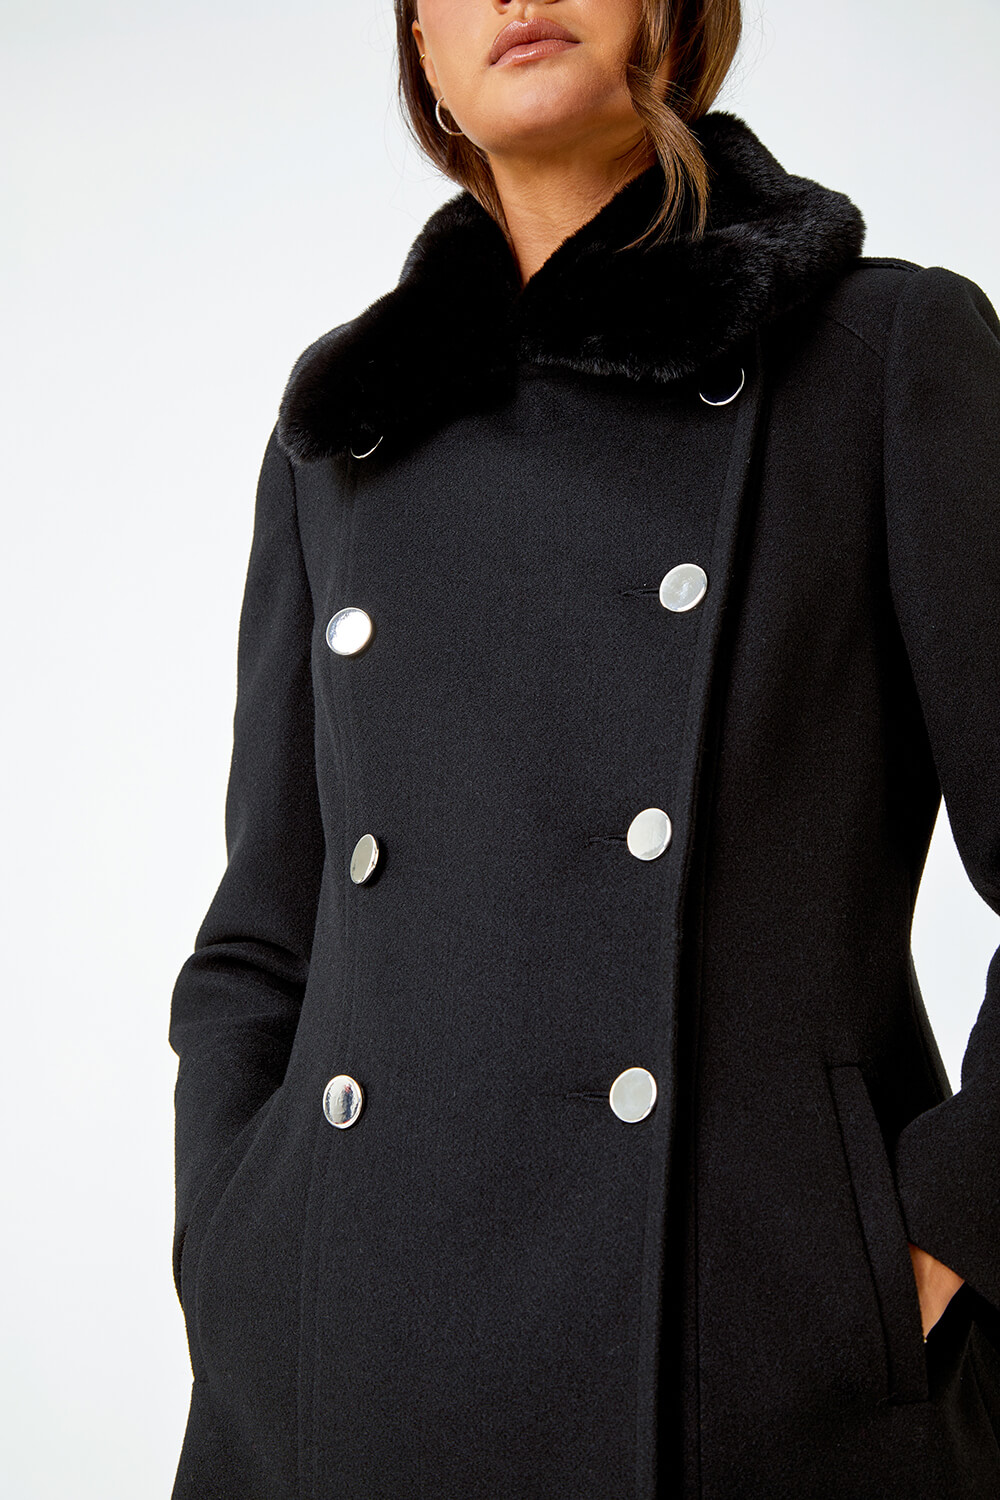 Black Double Breasted Faux Fur Collar Coat, Image 5 of 5